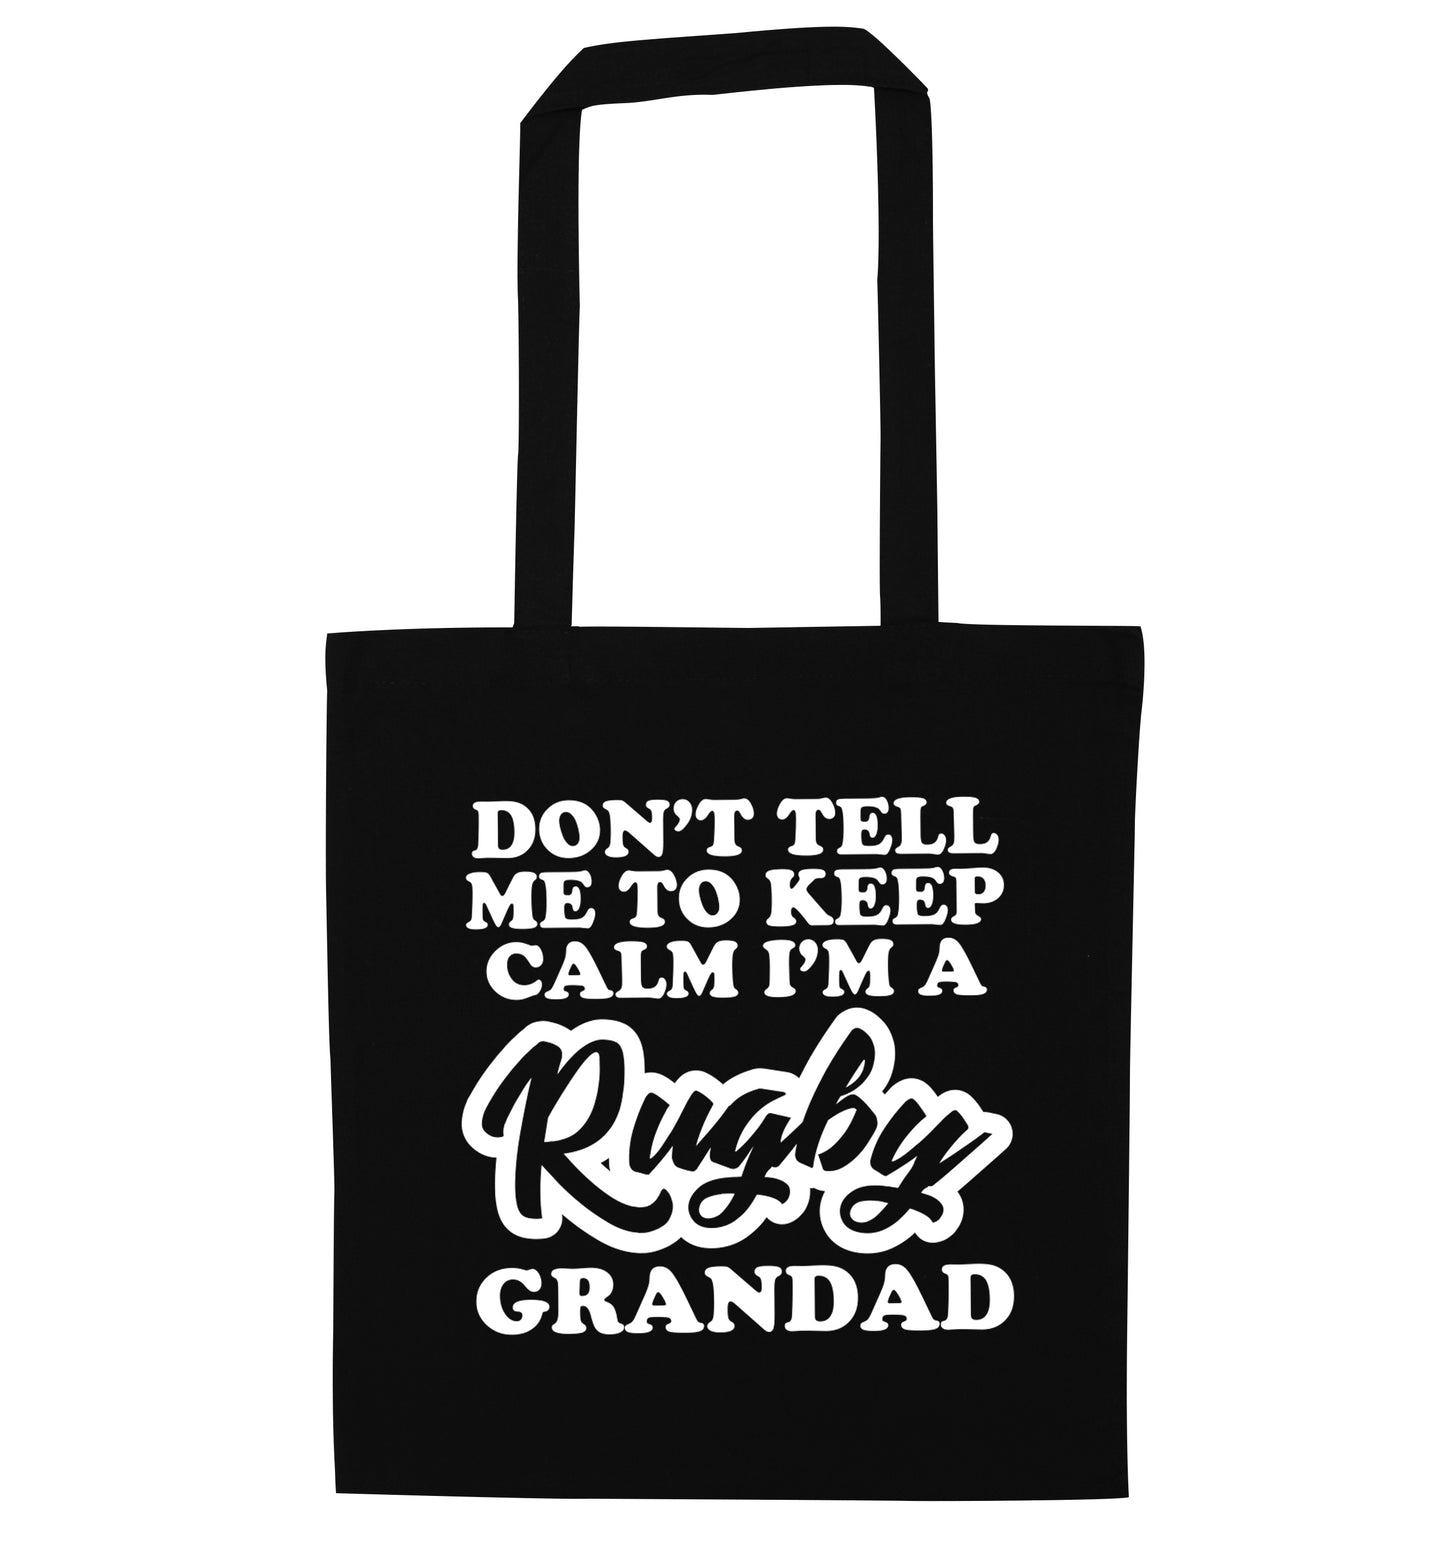 Don't tell me to keep calm I'm a rugby dad black tote bag